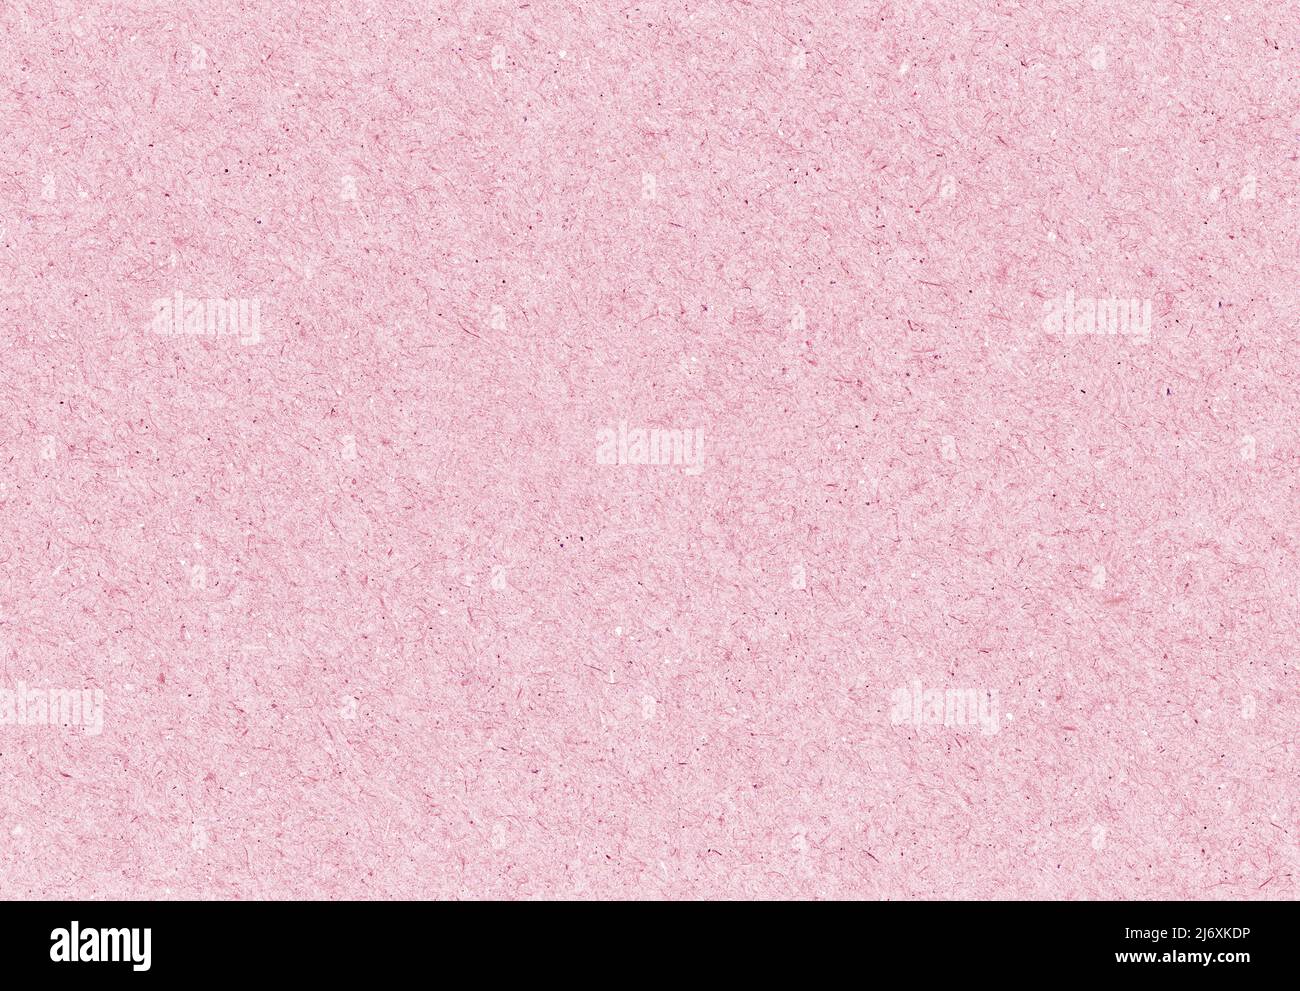 Pink paper texture background Stock Photo